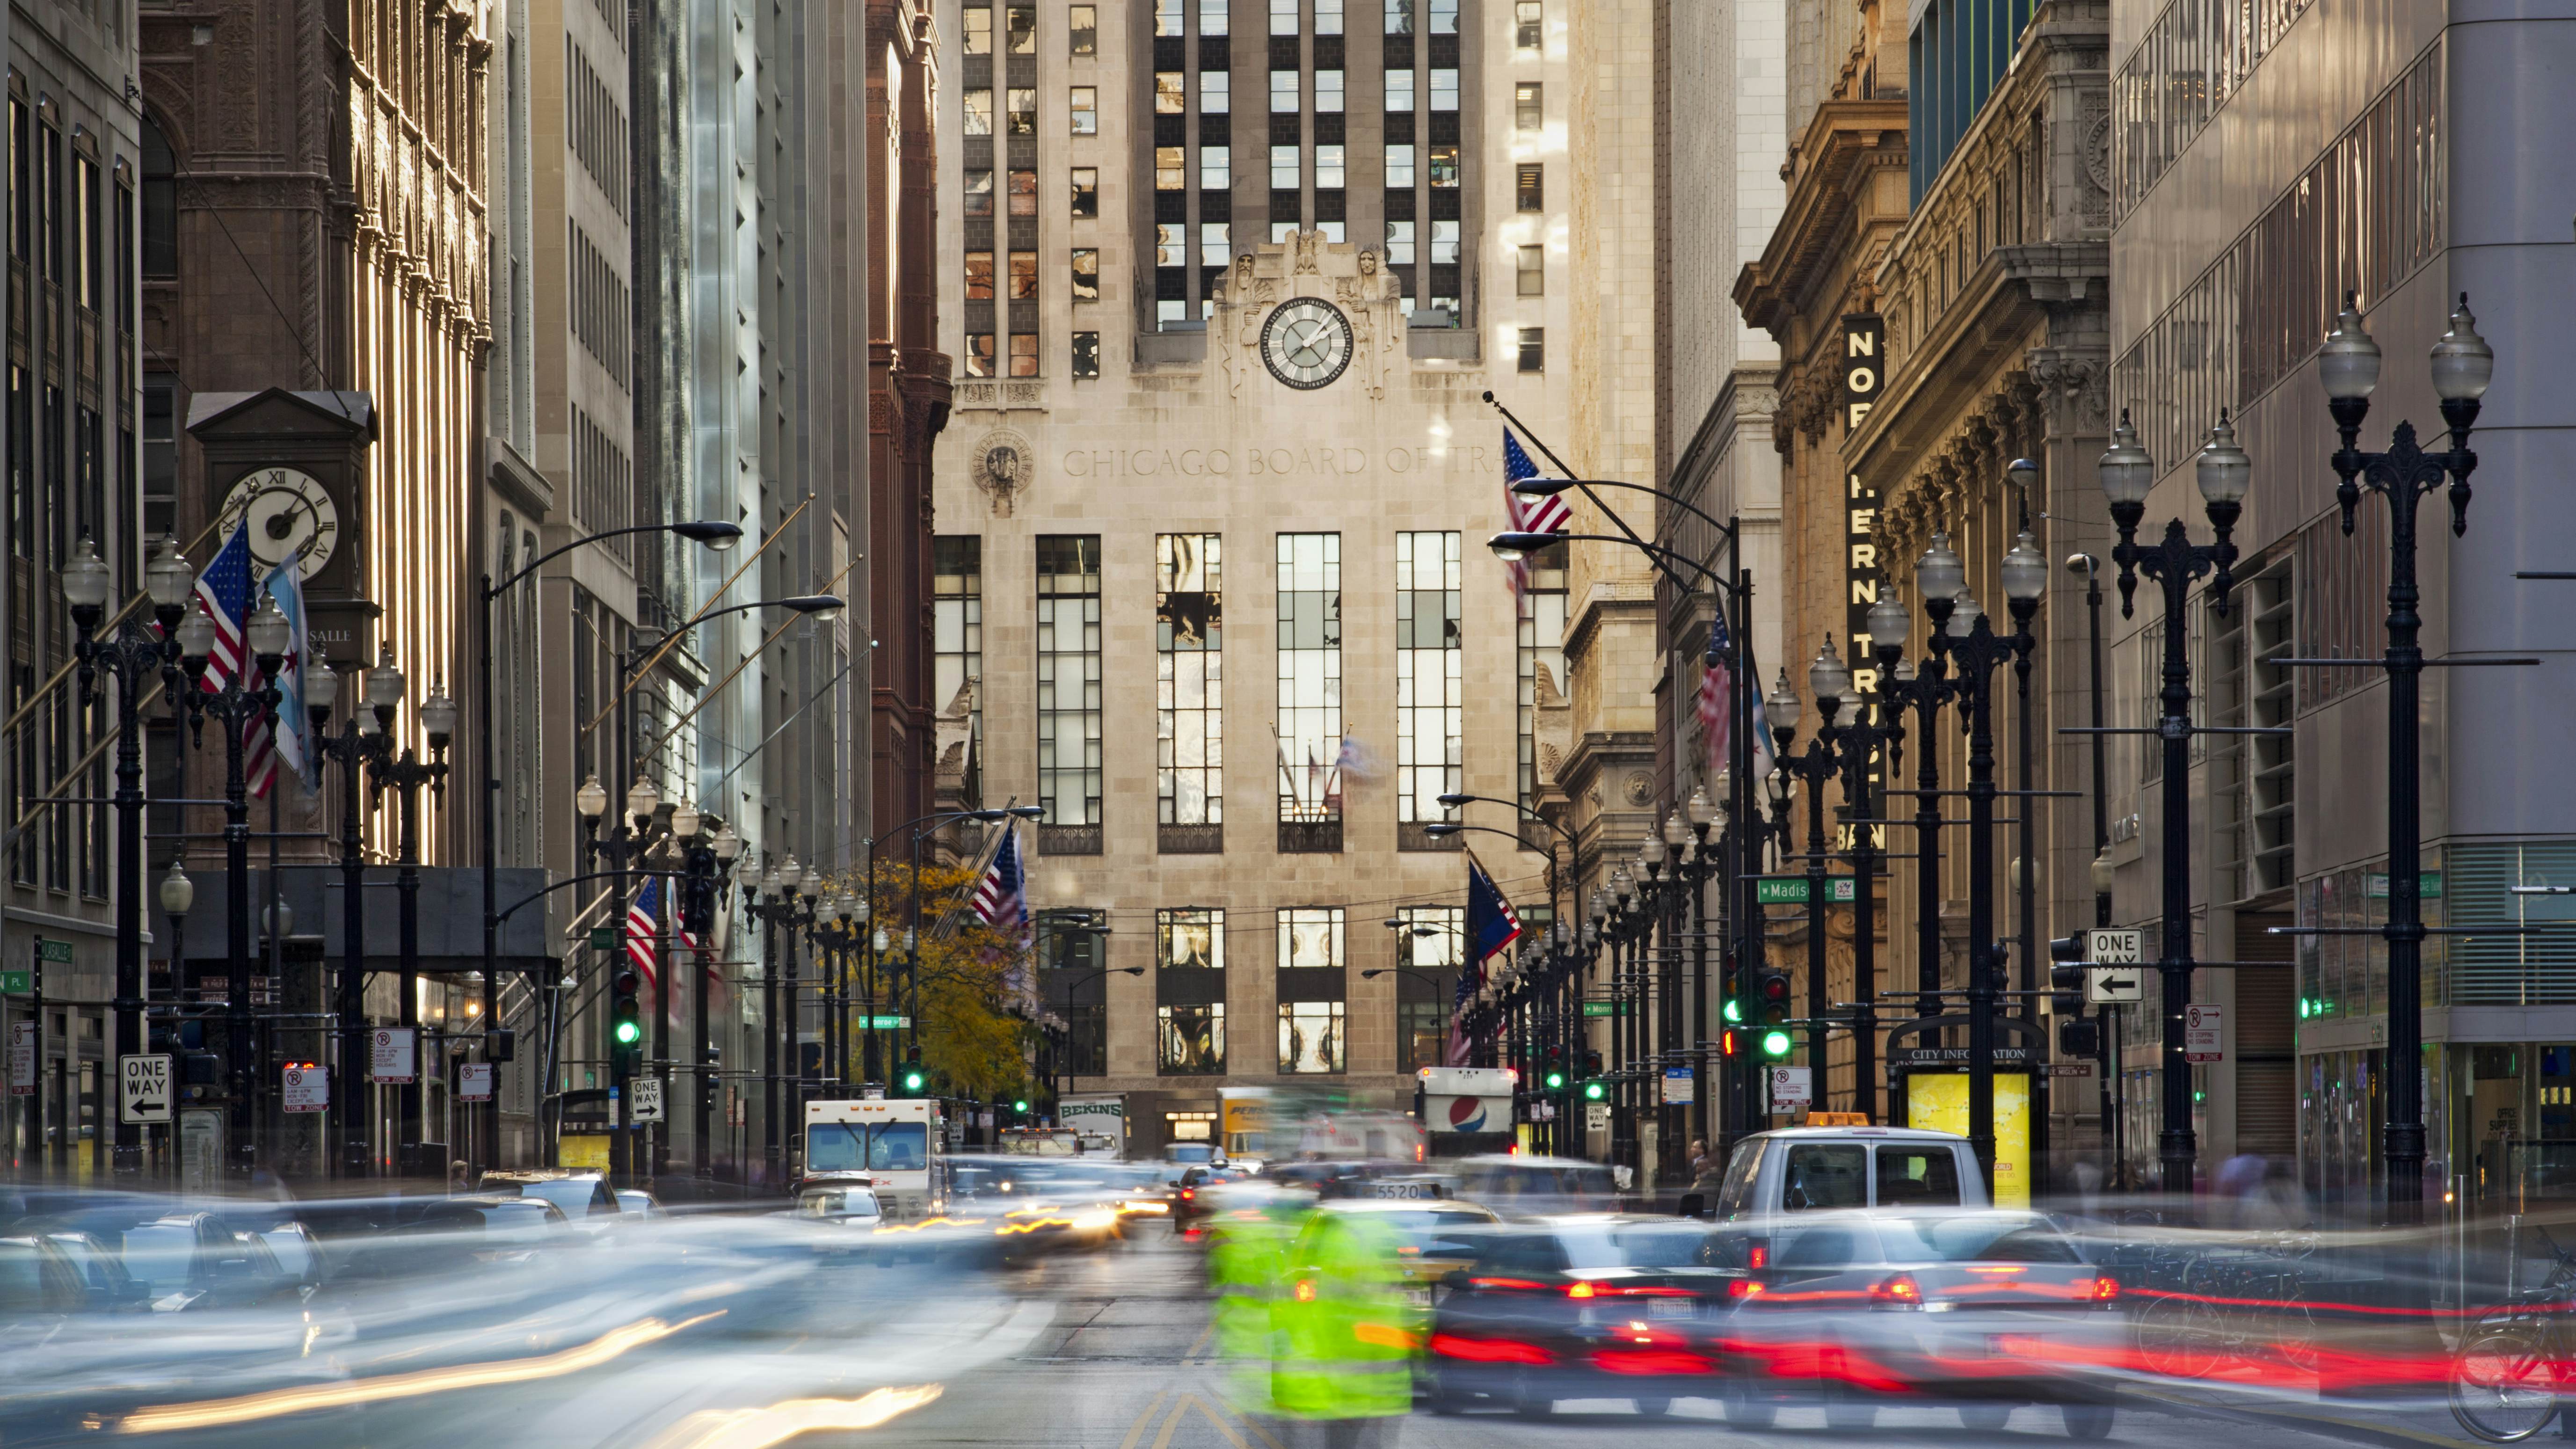 South LaSalle Street in Chicago’s financial district.